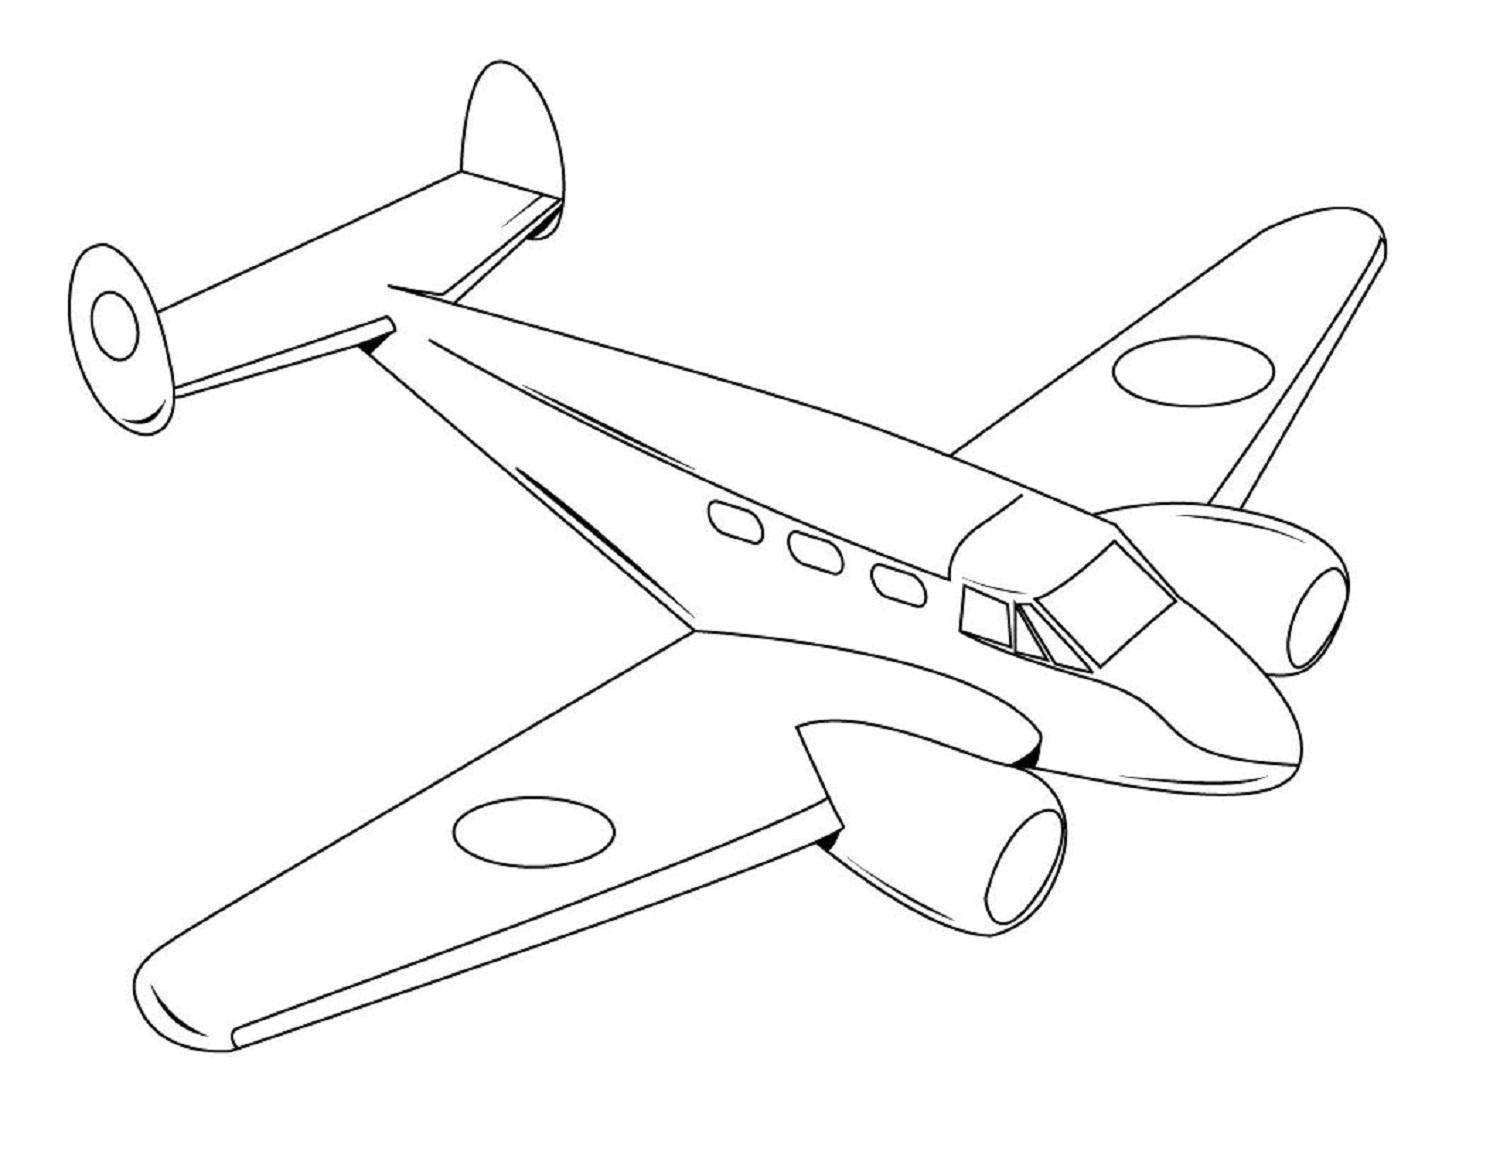 Coloring Airplane. Category The planes. Tags:  Plane.